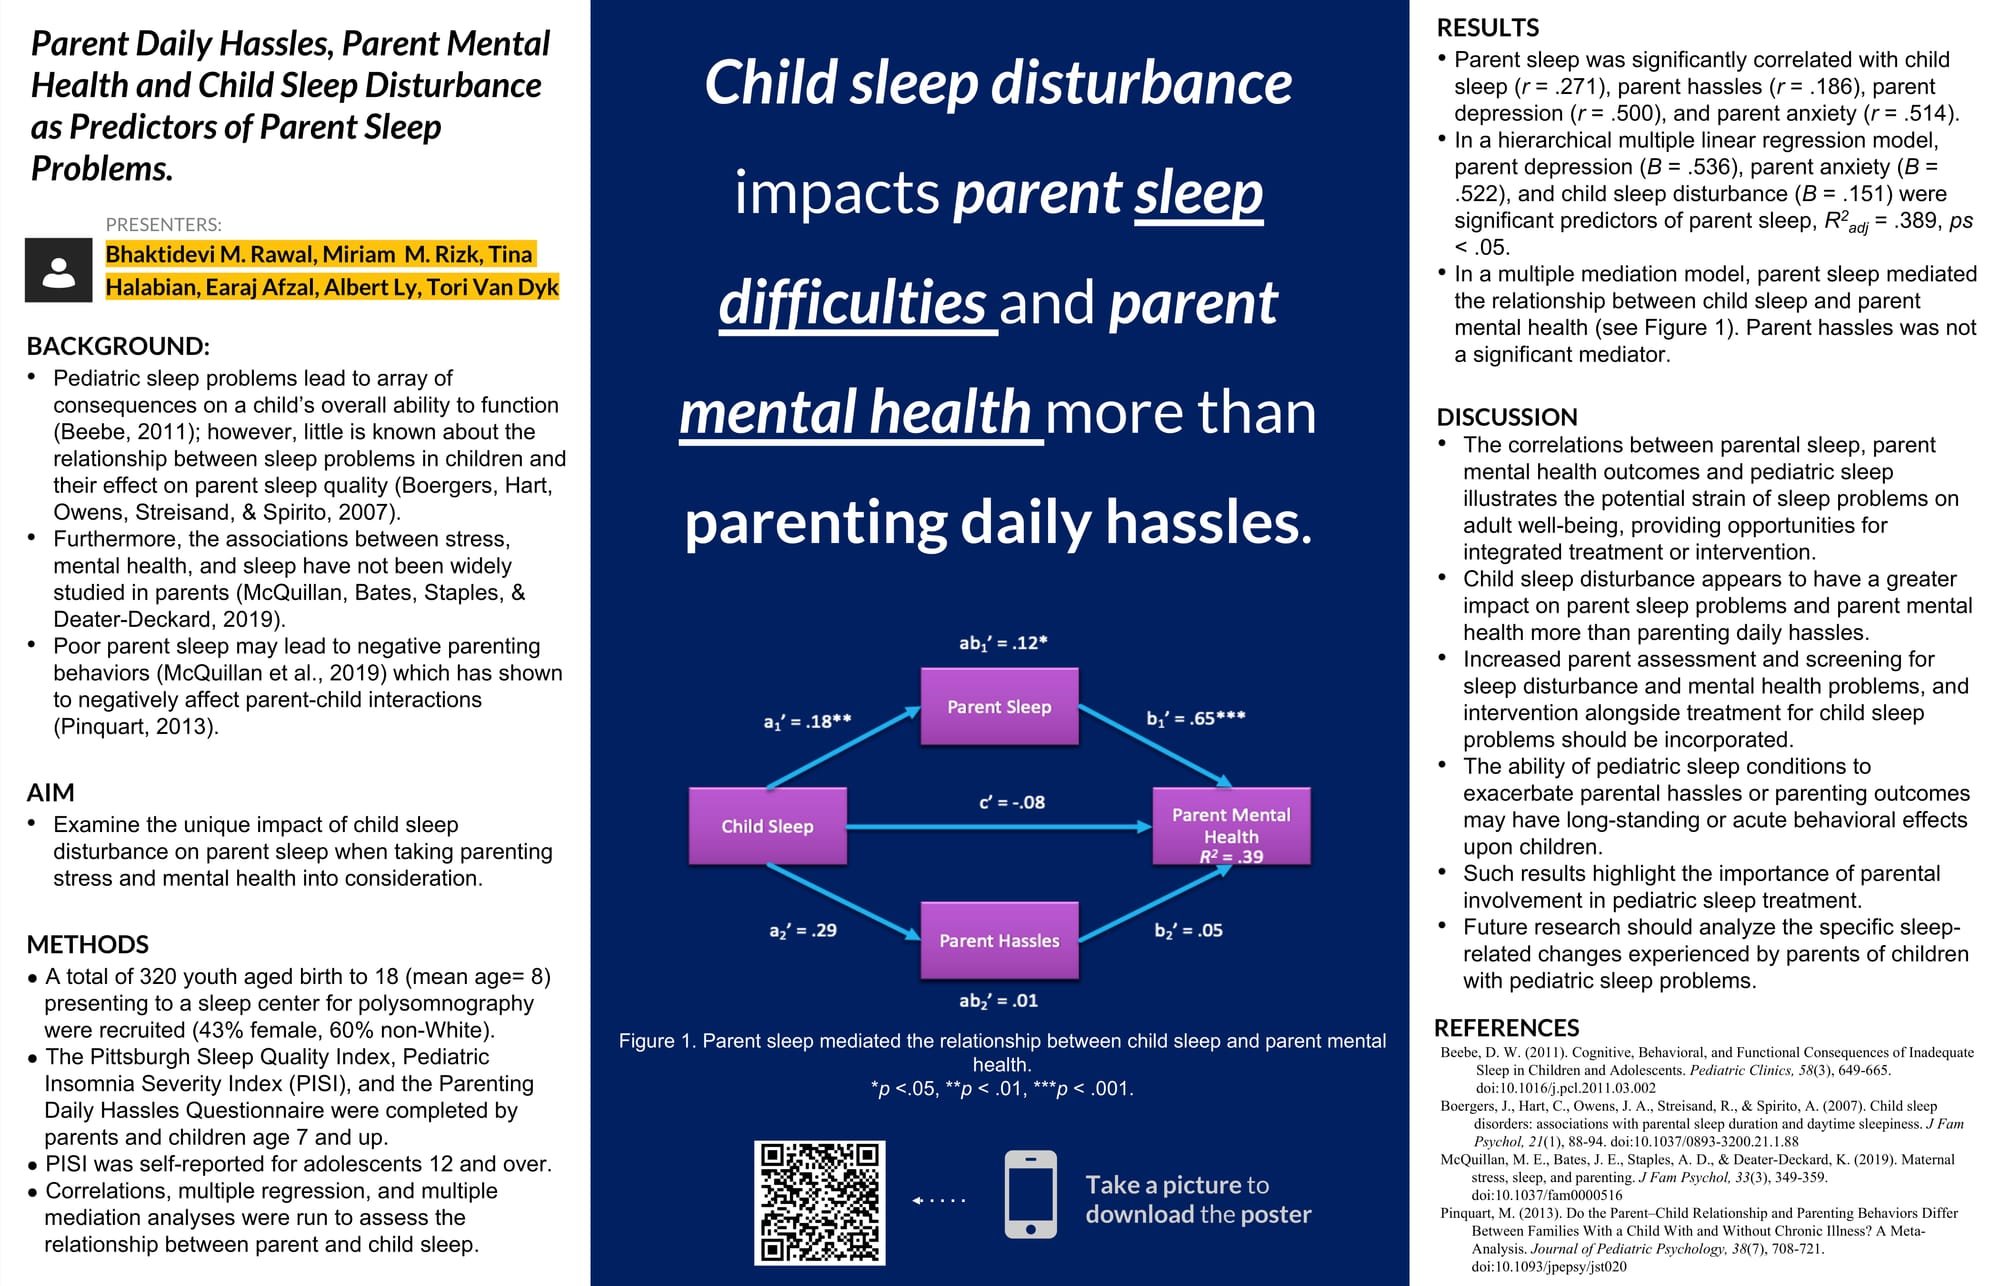 Parent Daily Hassles, Parent Mental Health and Child Sleep Disturbance as Predictors of Parent Sleep Problems